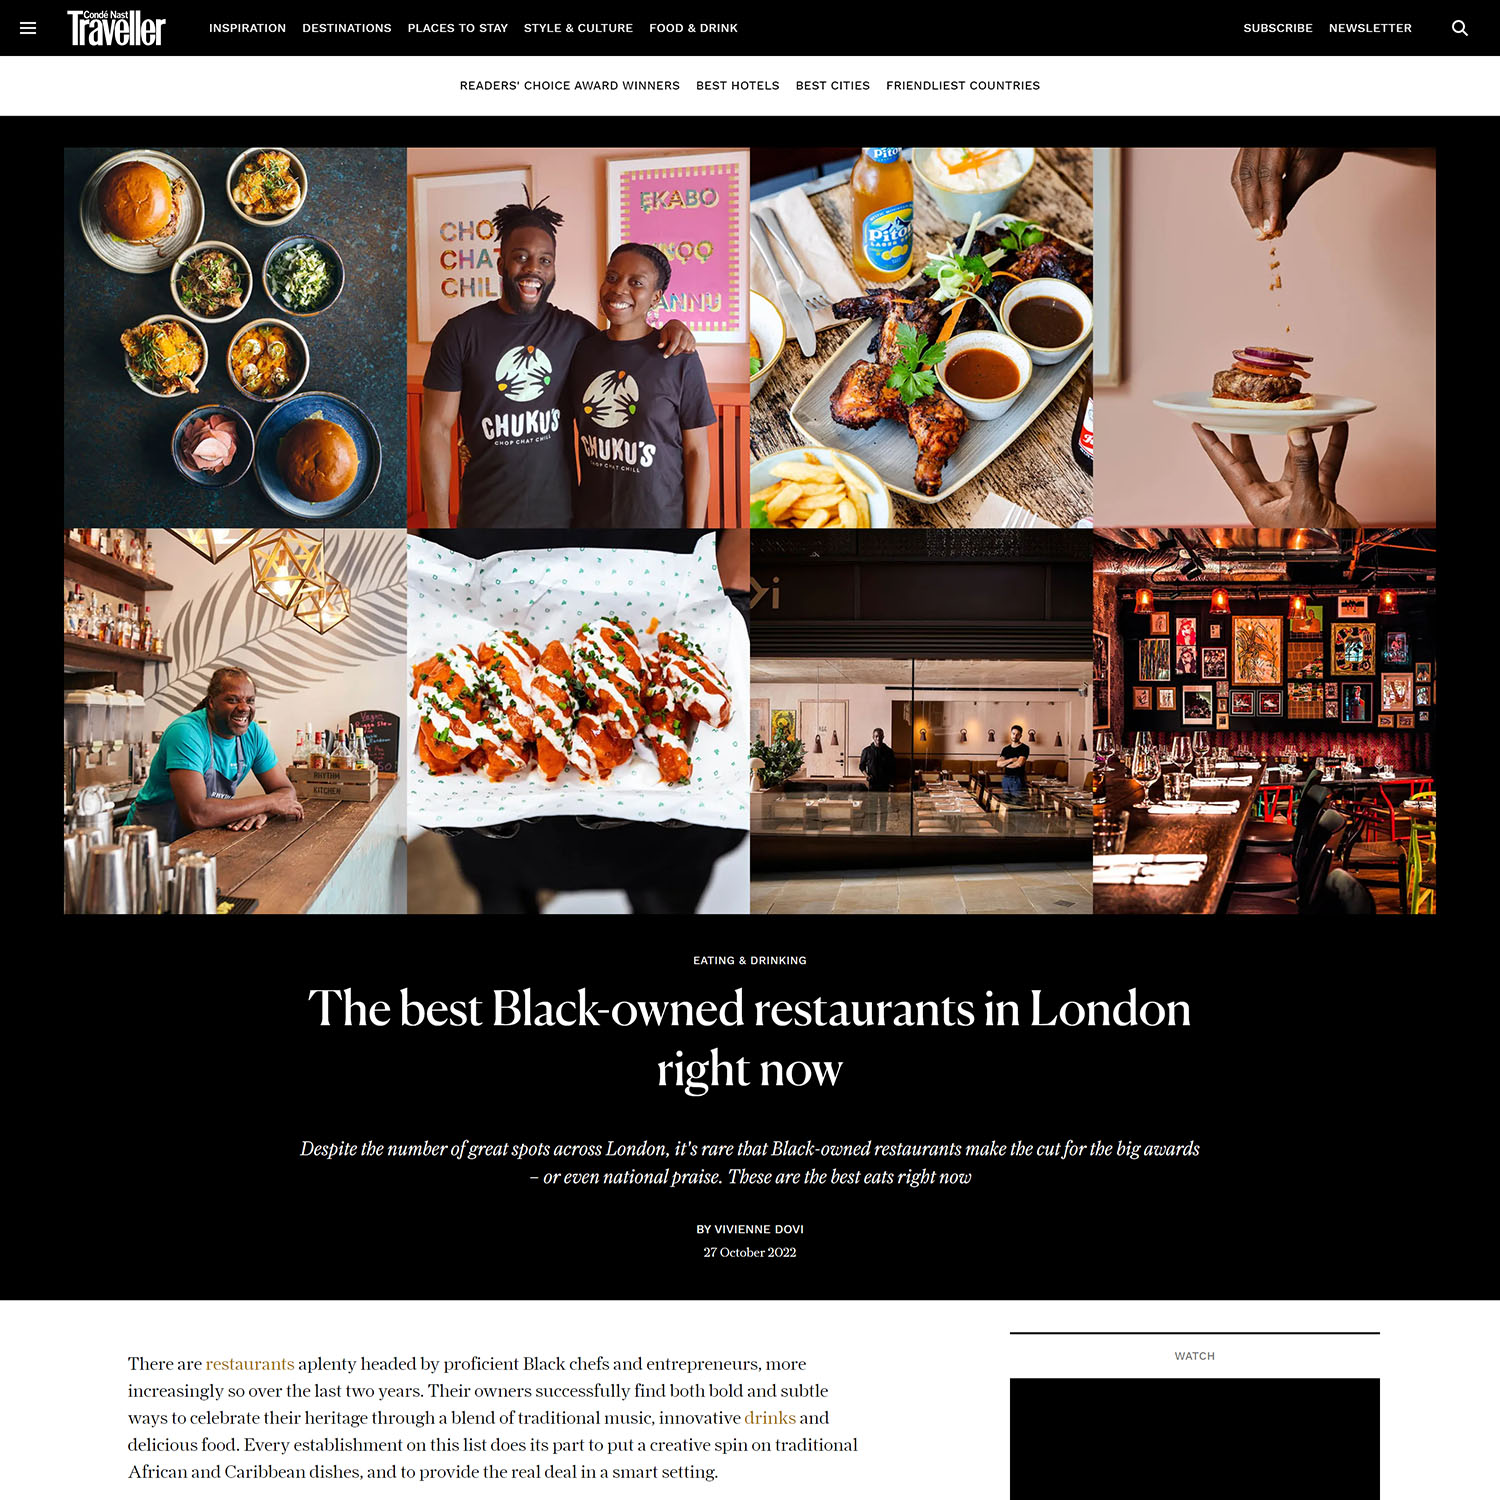 condenast-traveller-the-best-black-owned-restaurants-in-london-right-now-parks-edge-bar-and-kitchen-header